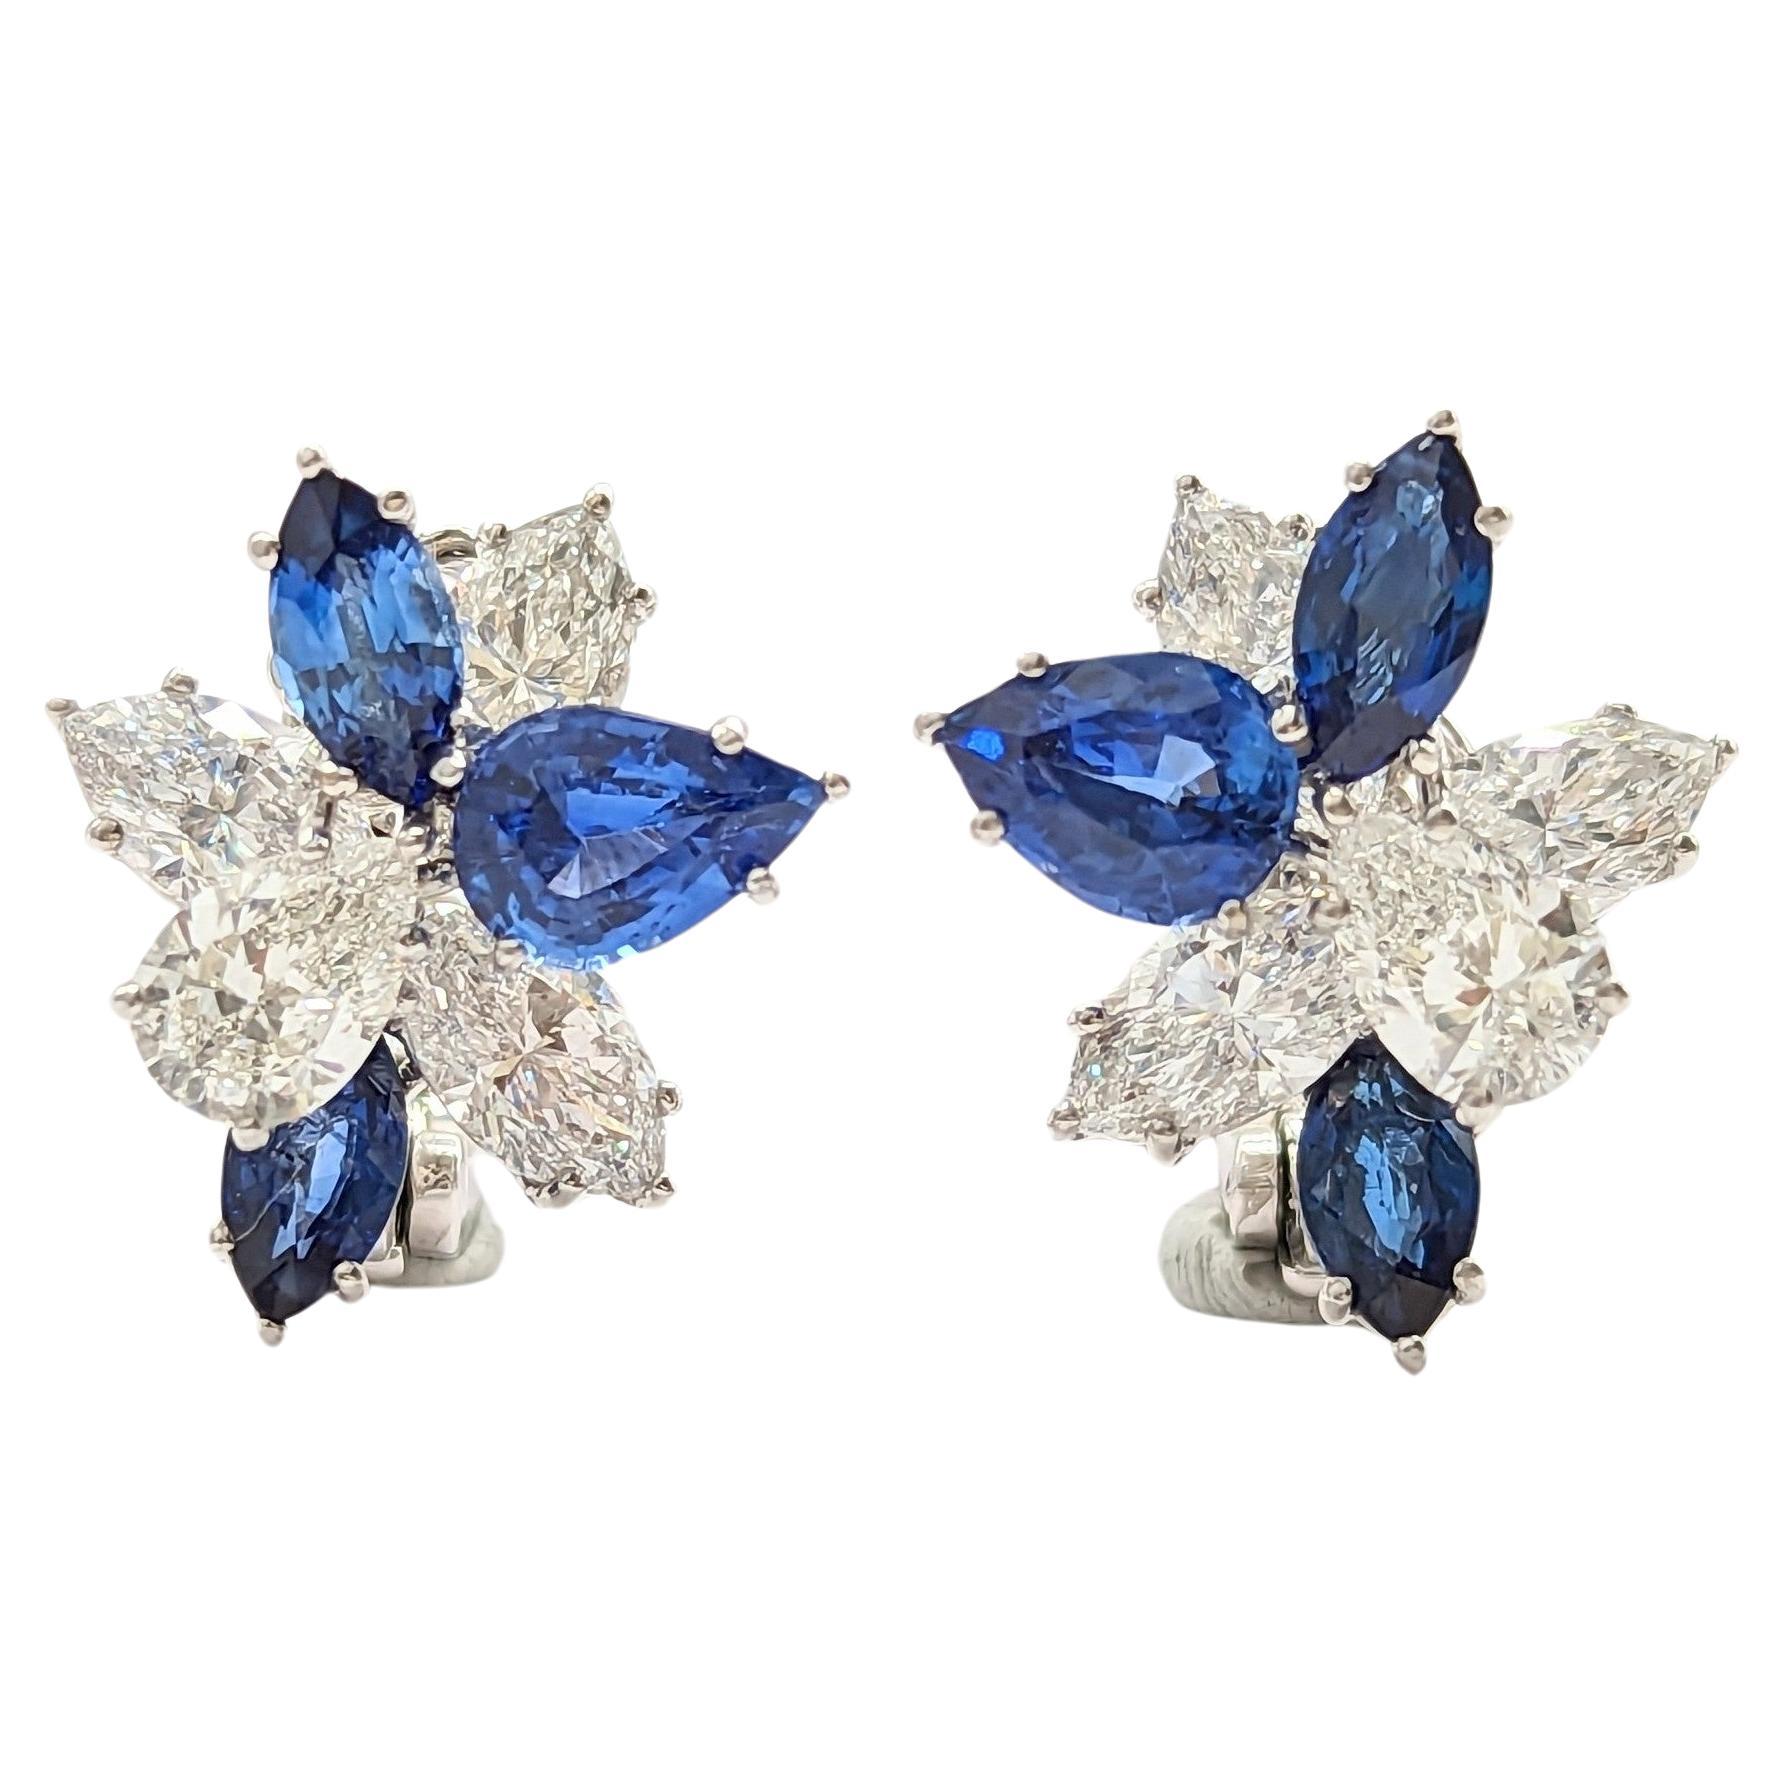 GIA Blue Sapphire and White Diamond Cluster Earrings in 18K White Gold